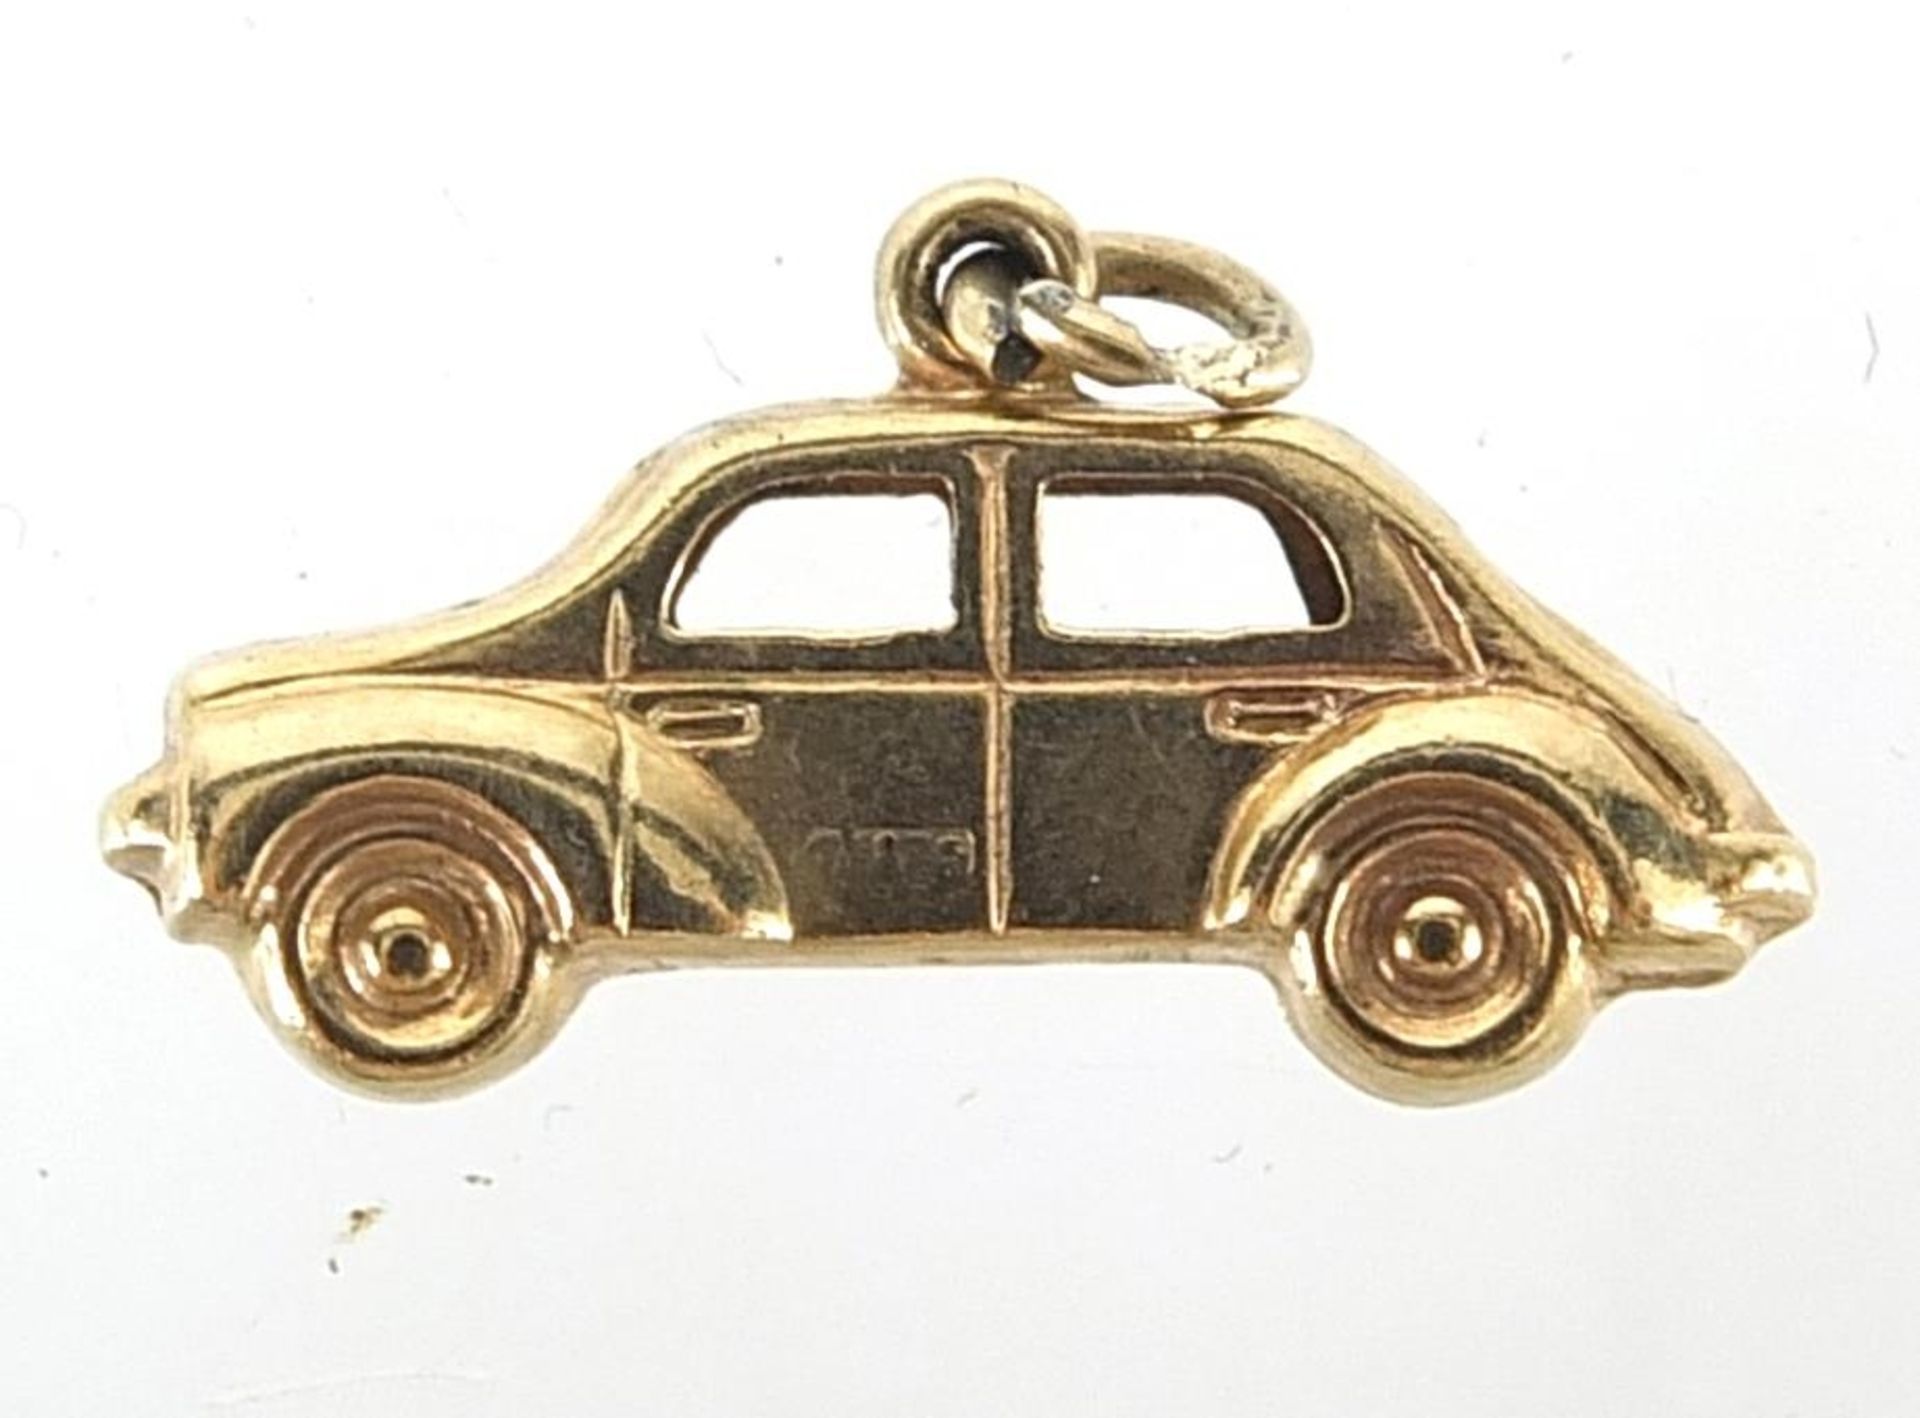 9ct gold car charm, 1.9cm in length, 0.6g - Image 2 of 2